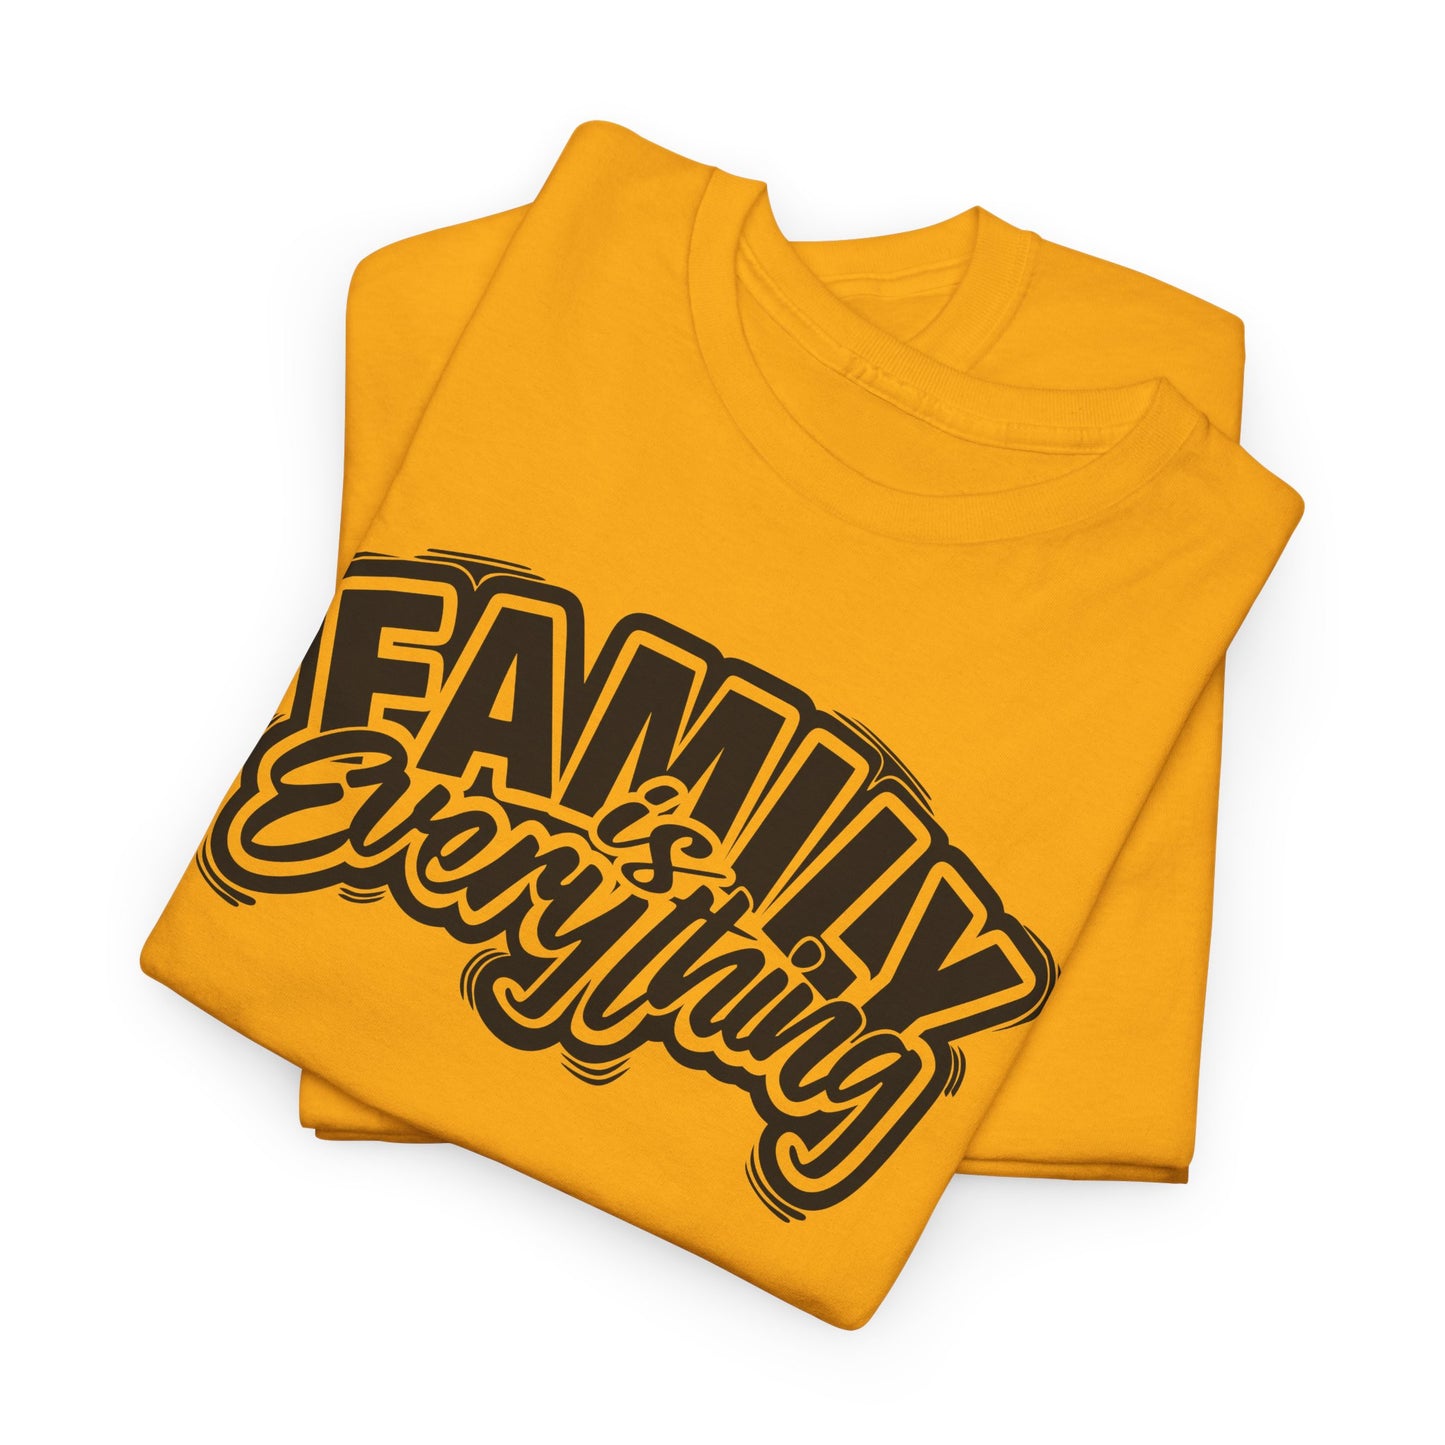 Family Is Everything - Craftee Designs & Prints 